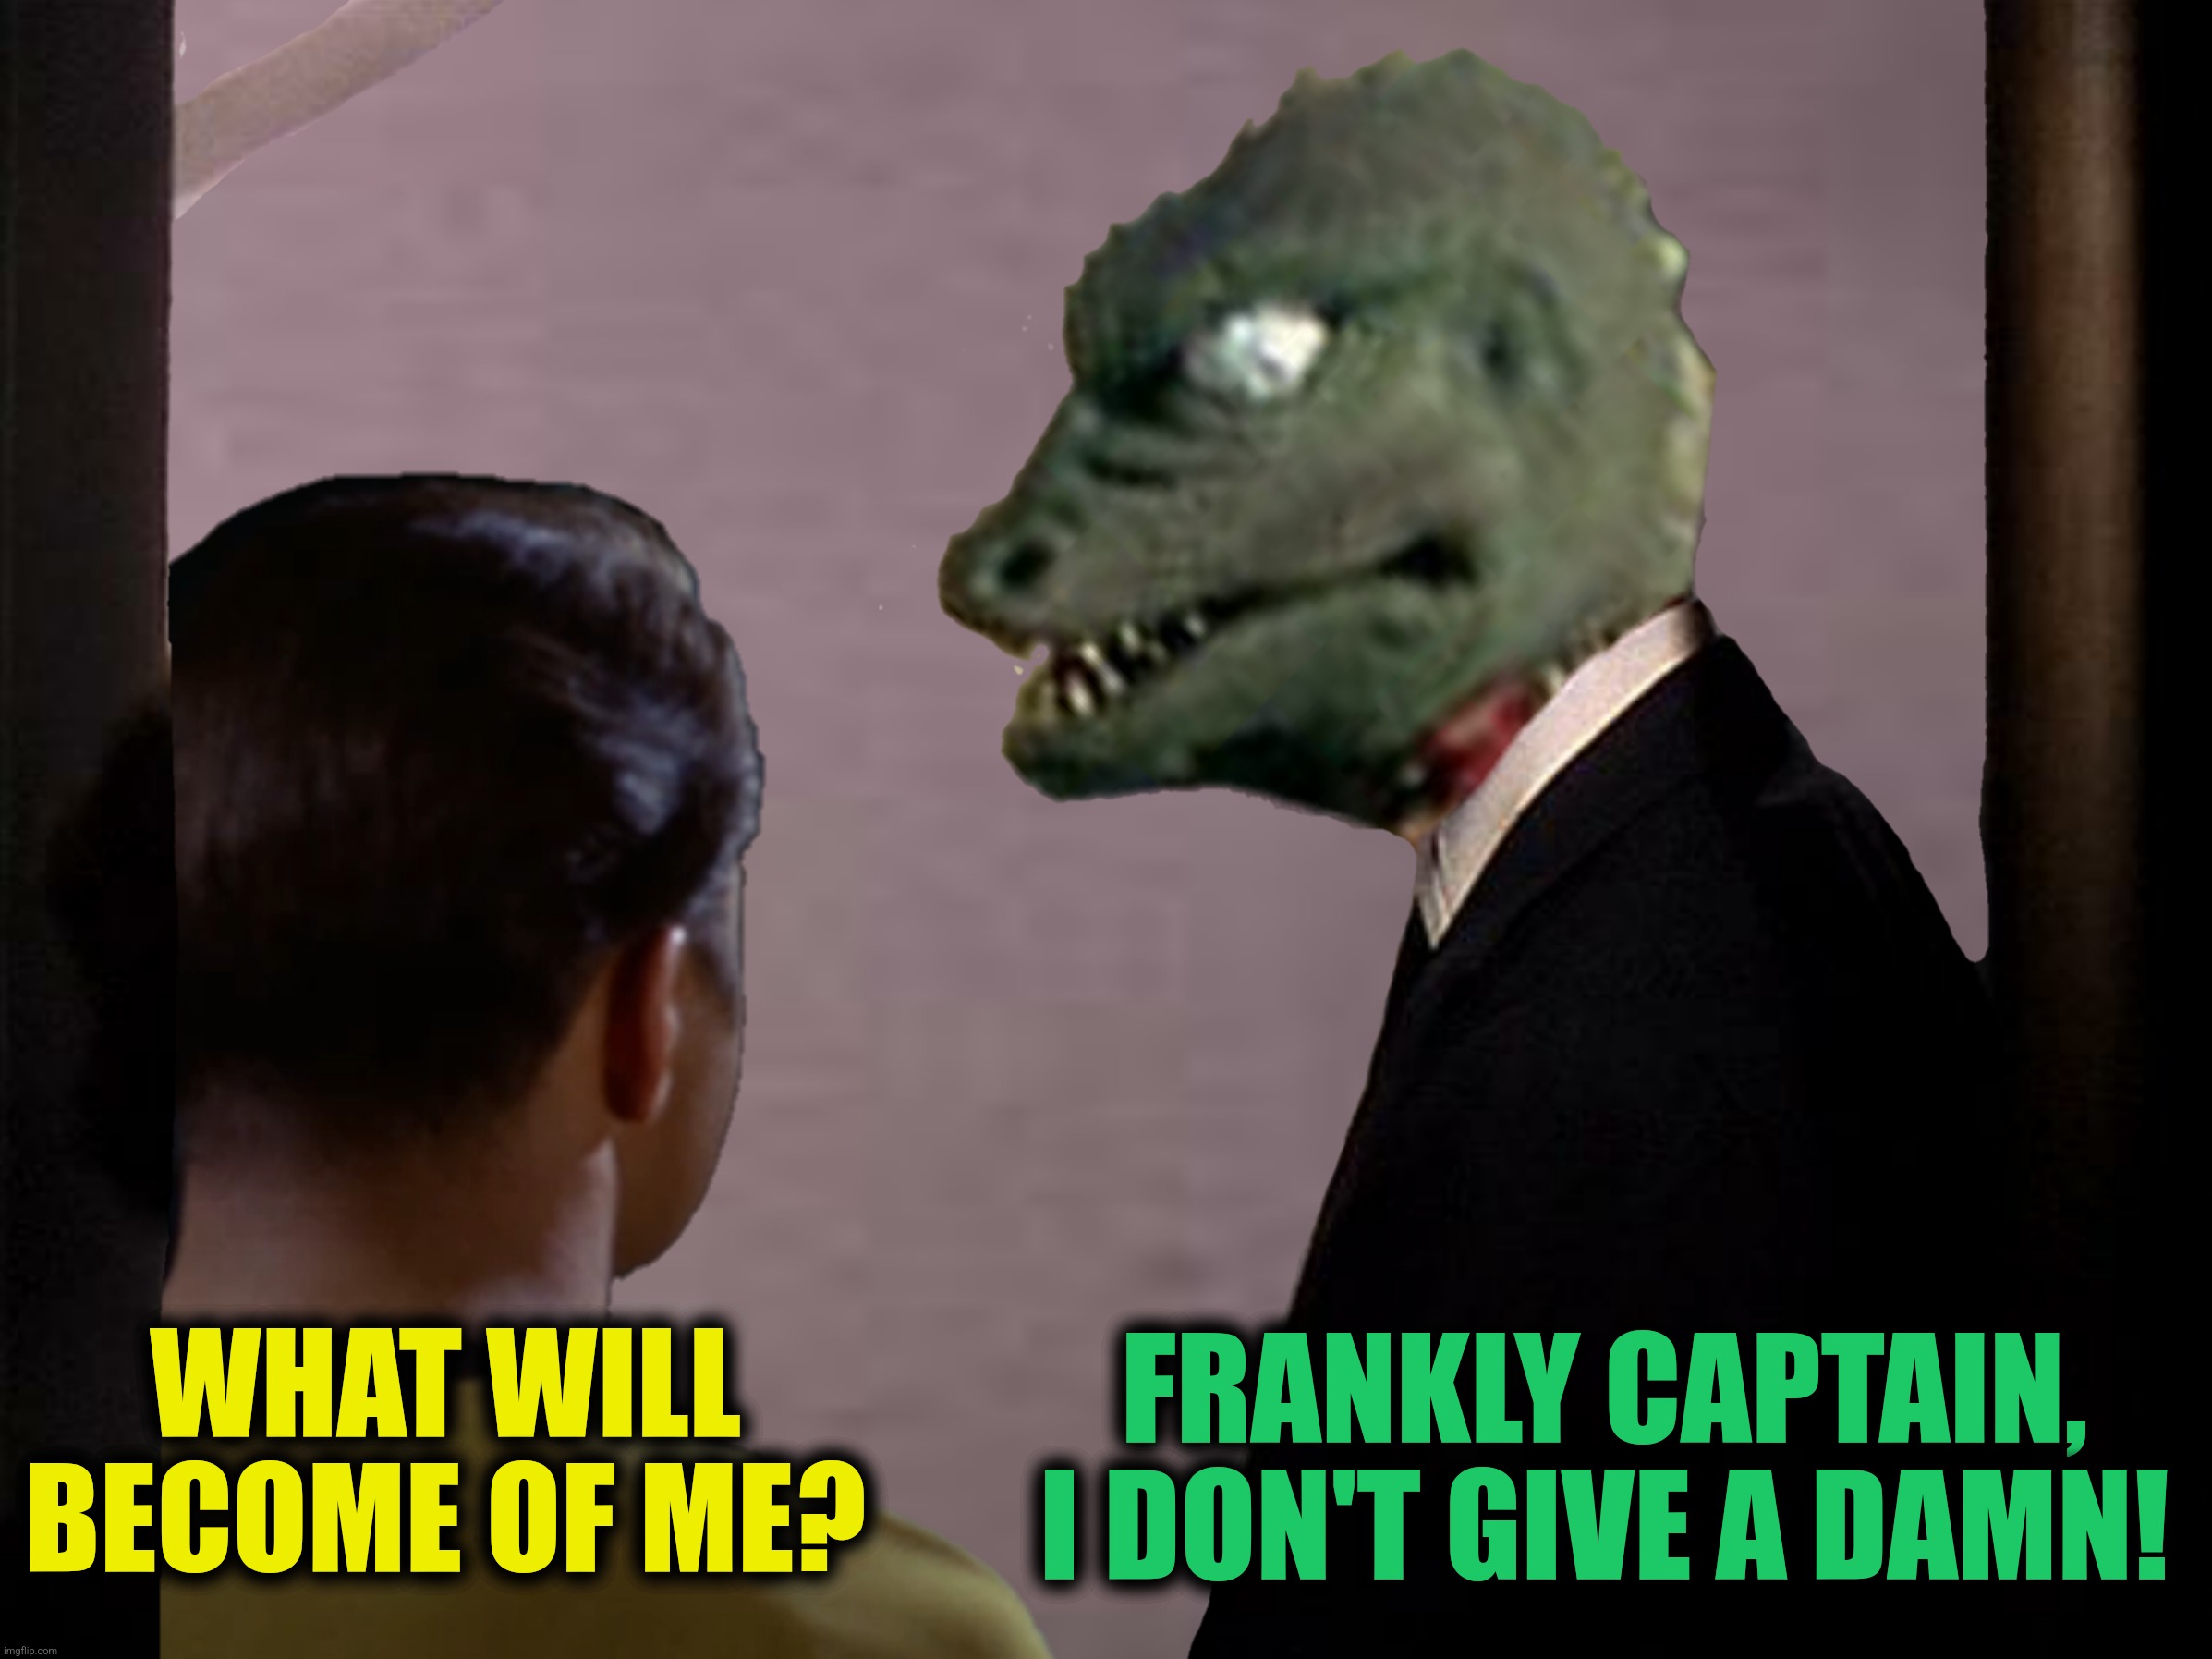 WHAT WILL BECOME OF ME? FRANKLY CAPTAIN, I DON'T GIVE A DAMN! | made w/ Imgflip meme maker